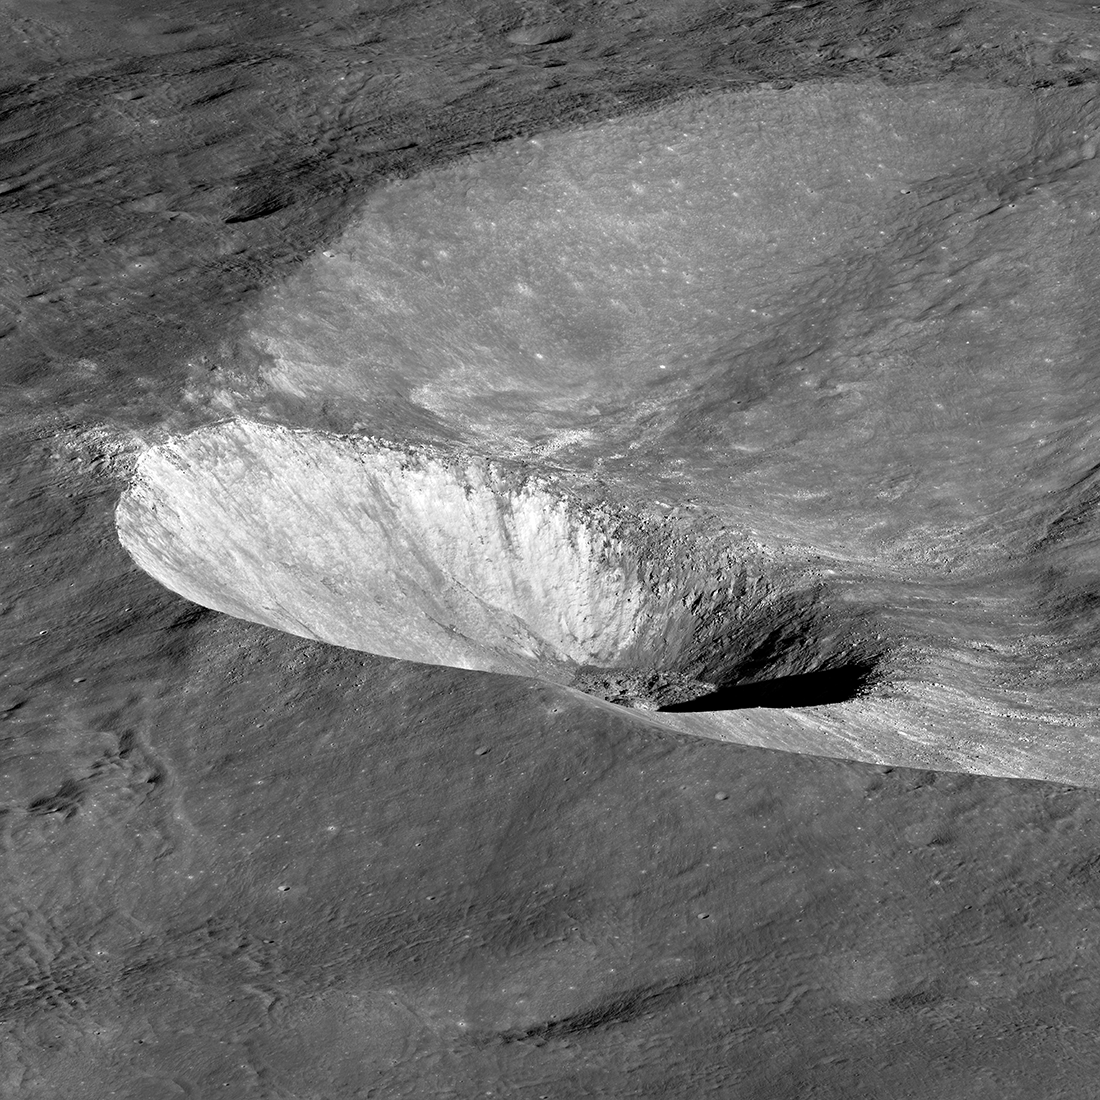 crater on a slope of a larger crater